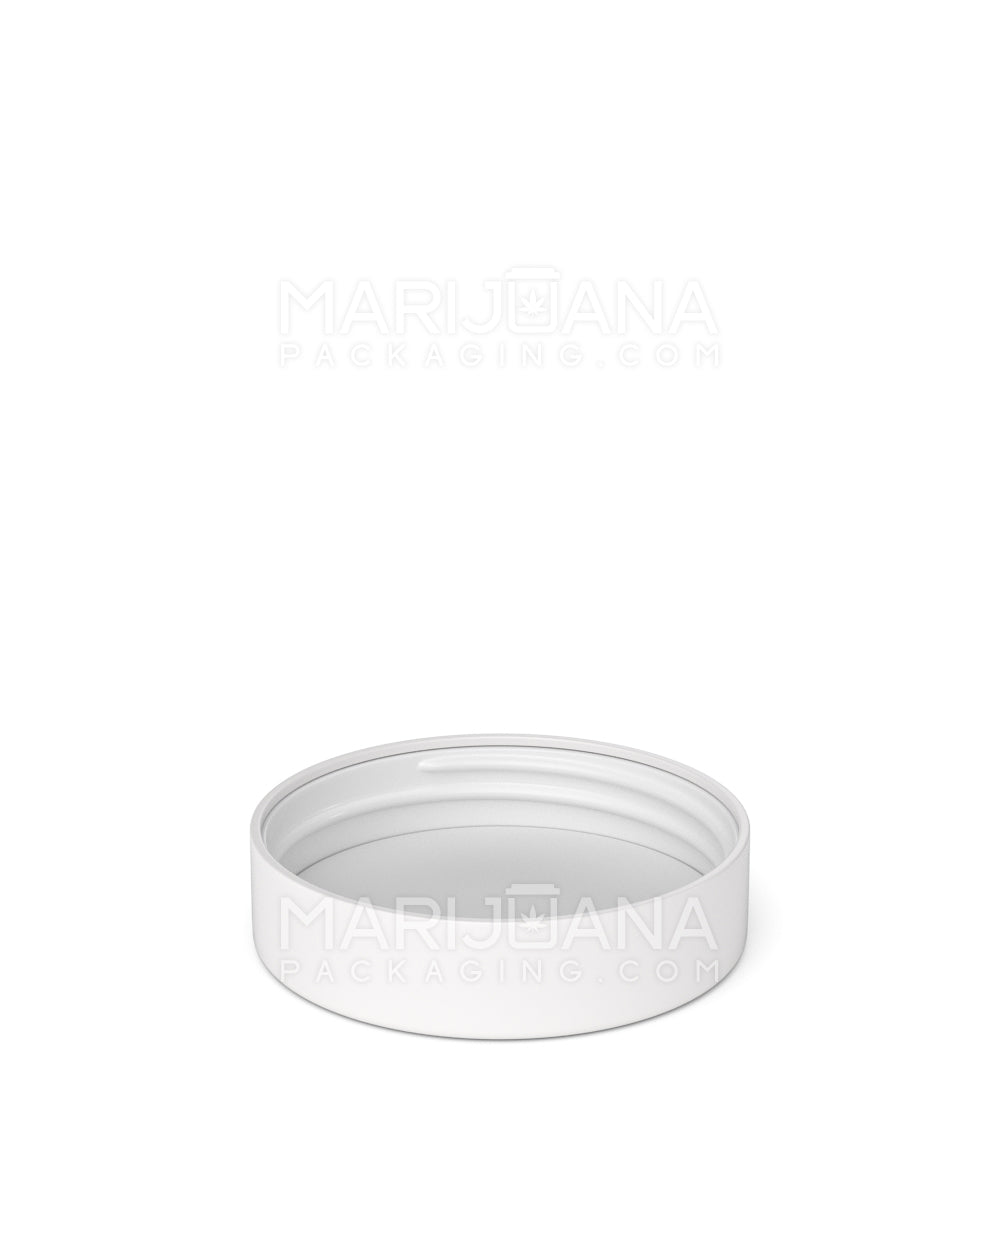 Child Resistant | Smooth Flat Push Down & Turn Plastic Caps w/ Text & Foam Liner | 48mm - Matte White - 120 Count - 4